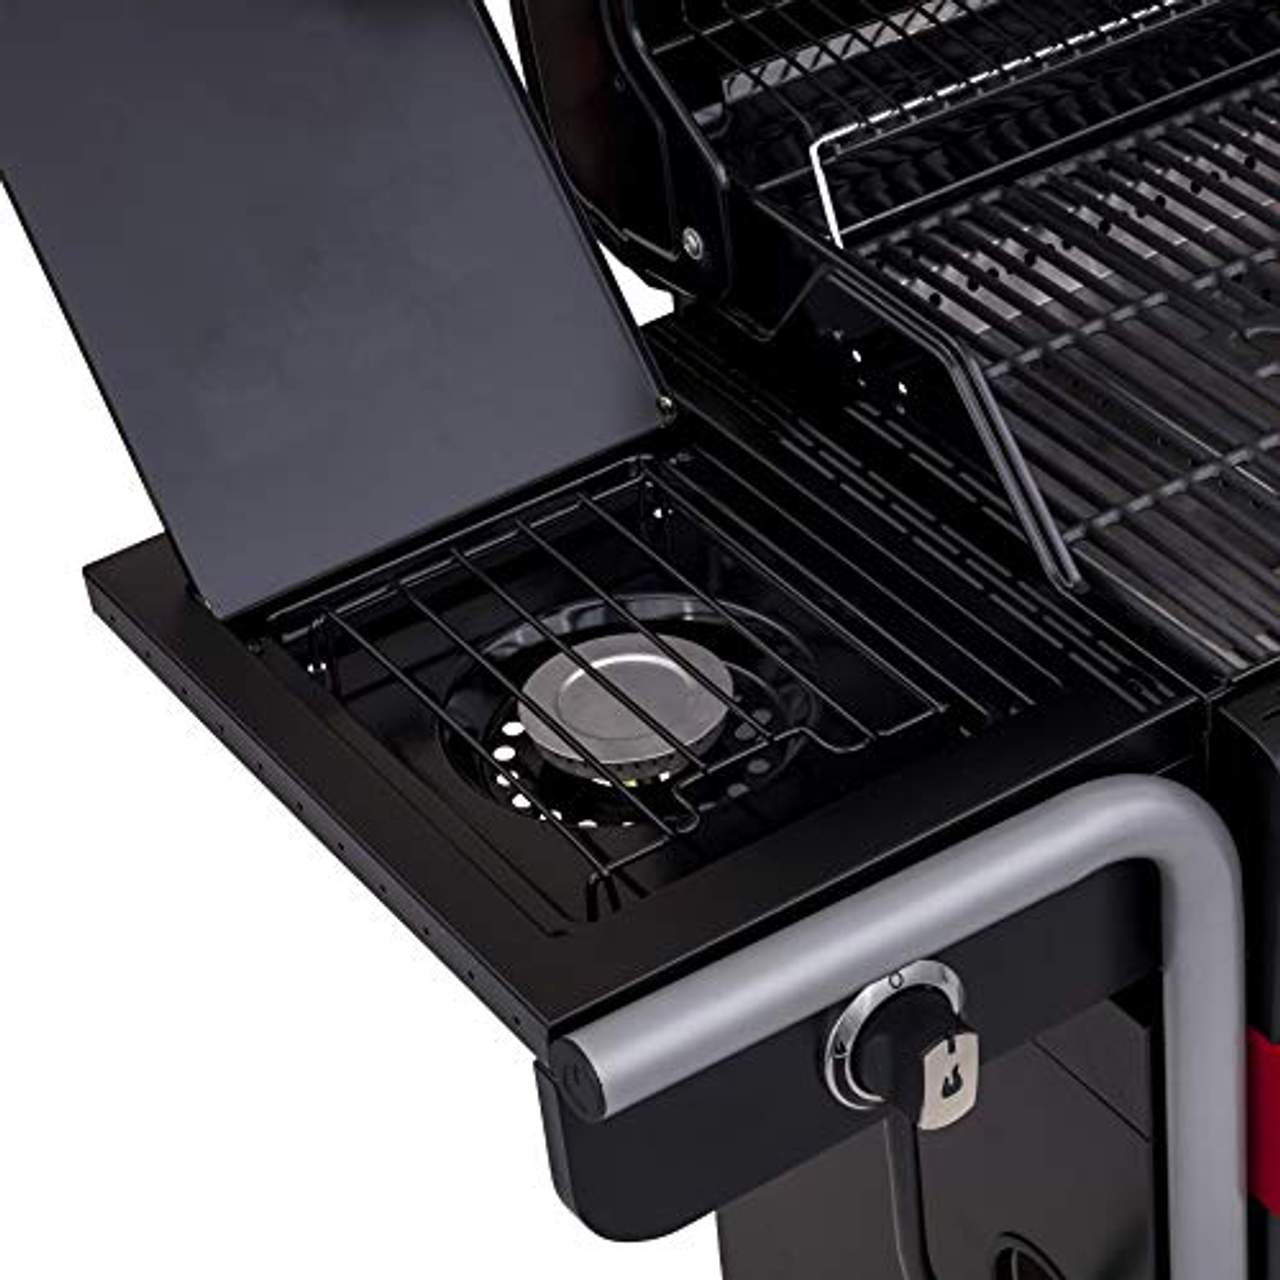 Char-Broil Gas2Coal 440 Hybrid Grill